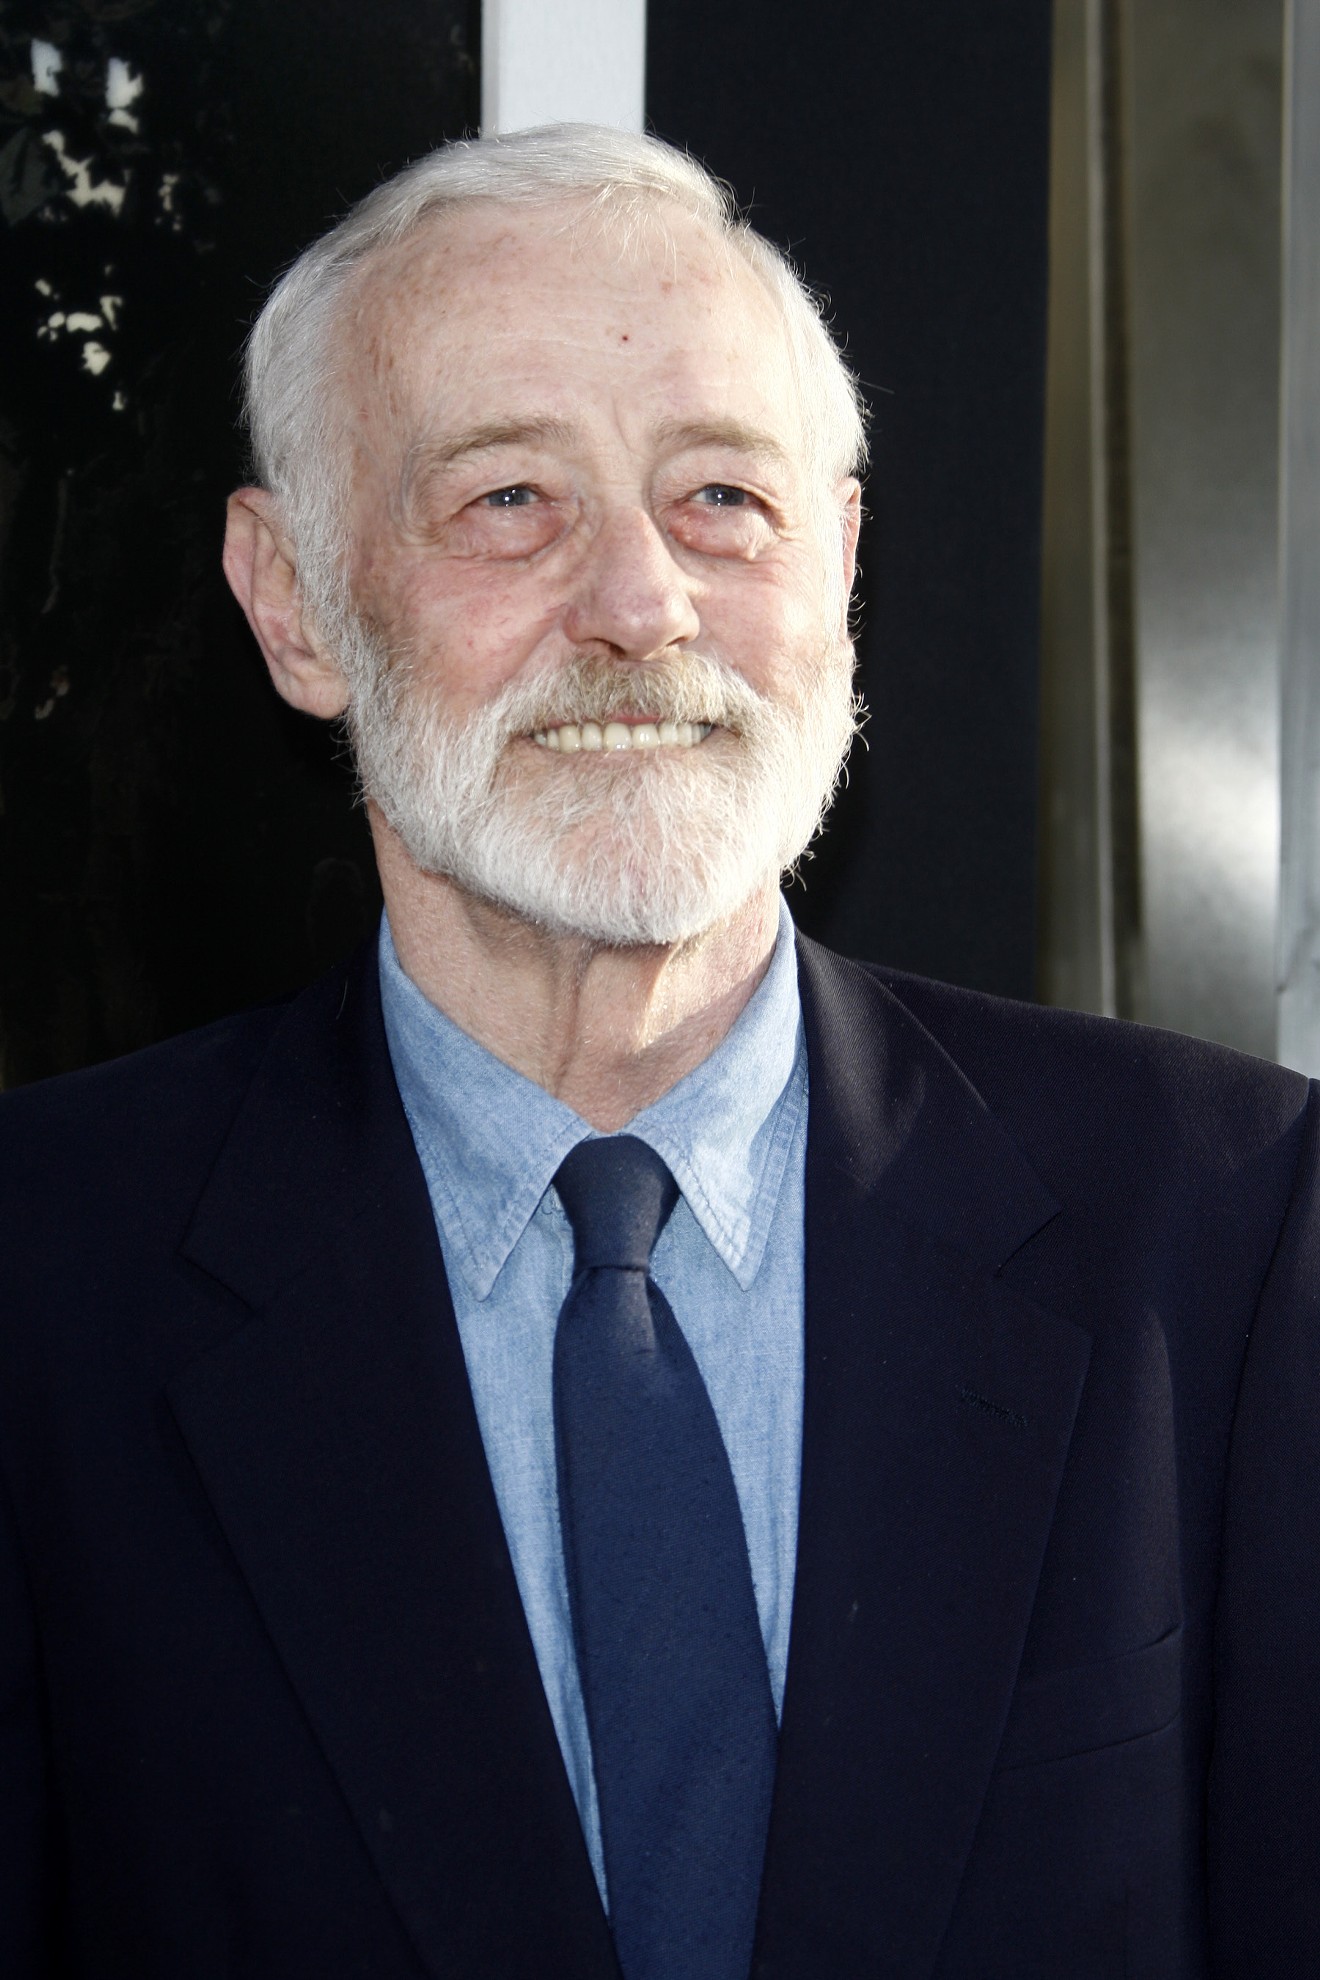 The late actor John Mahoney played the cranky but lovable Martin Crane on Frasier.